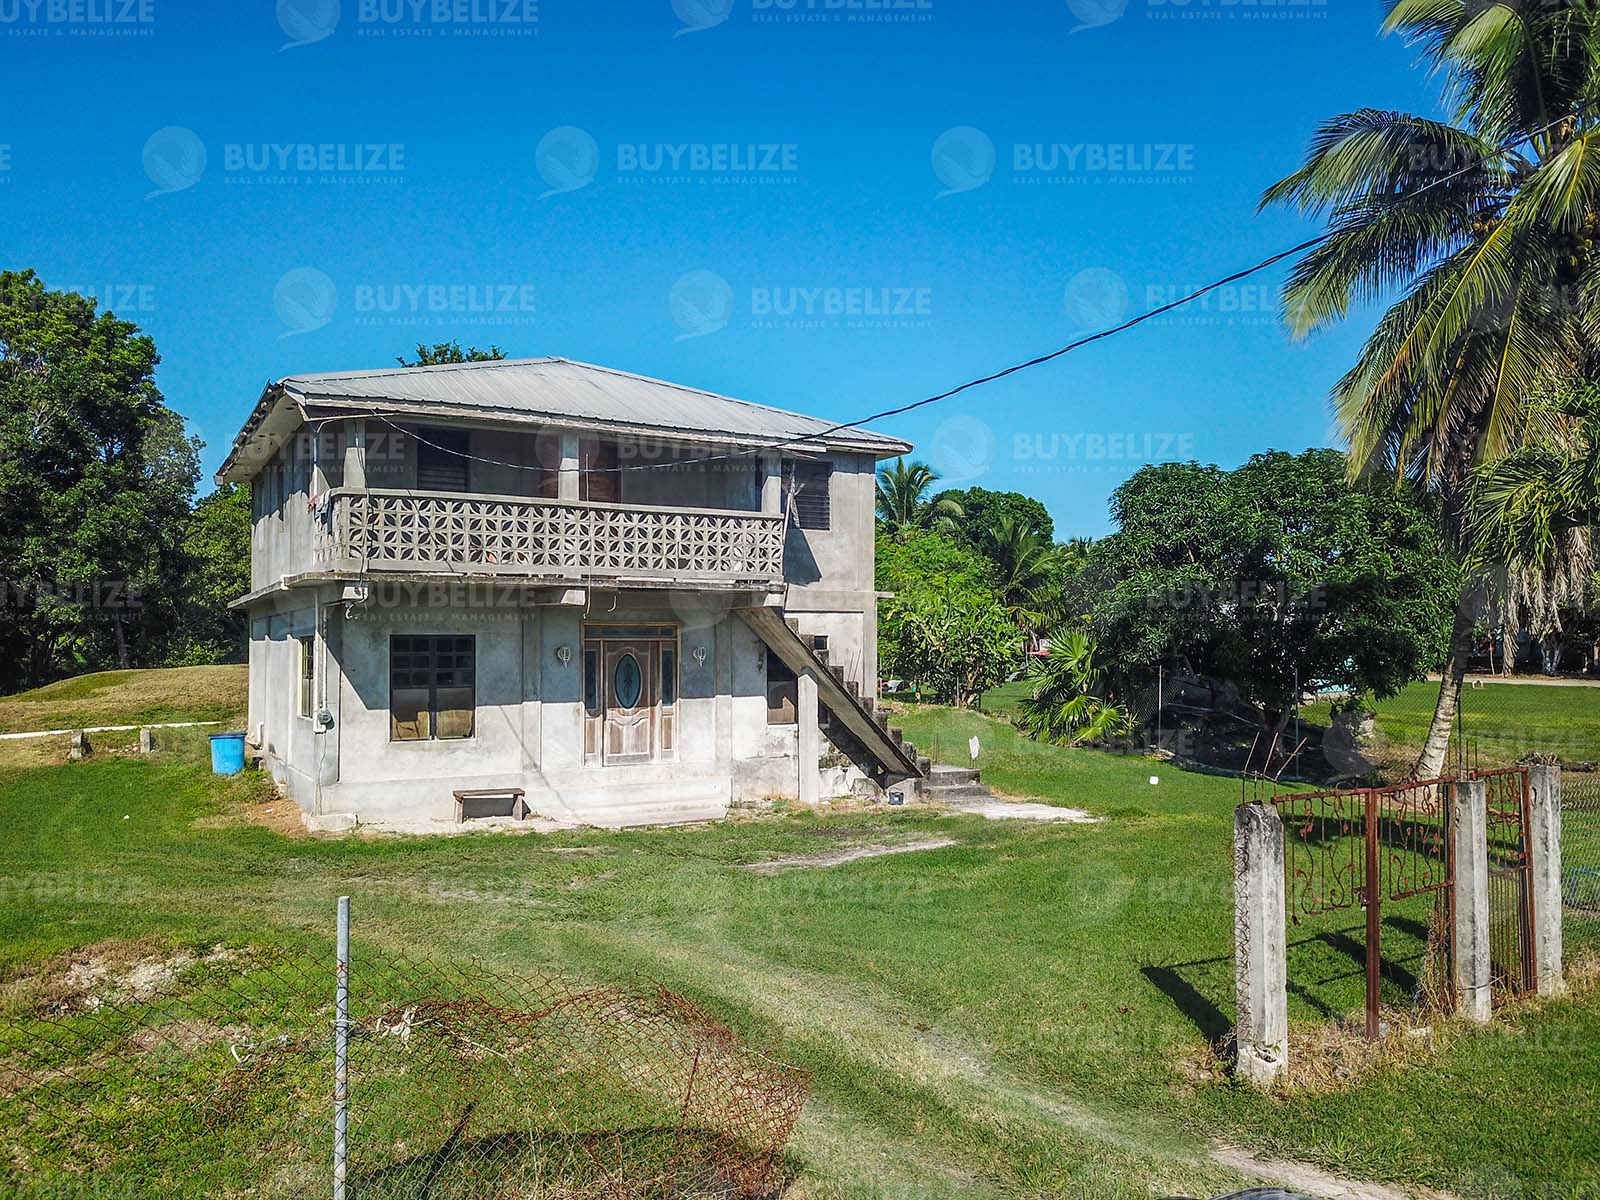 FOR-SALE: Two Story Concrete House in Corozal District, Belize